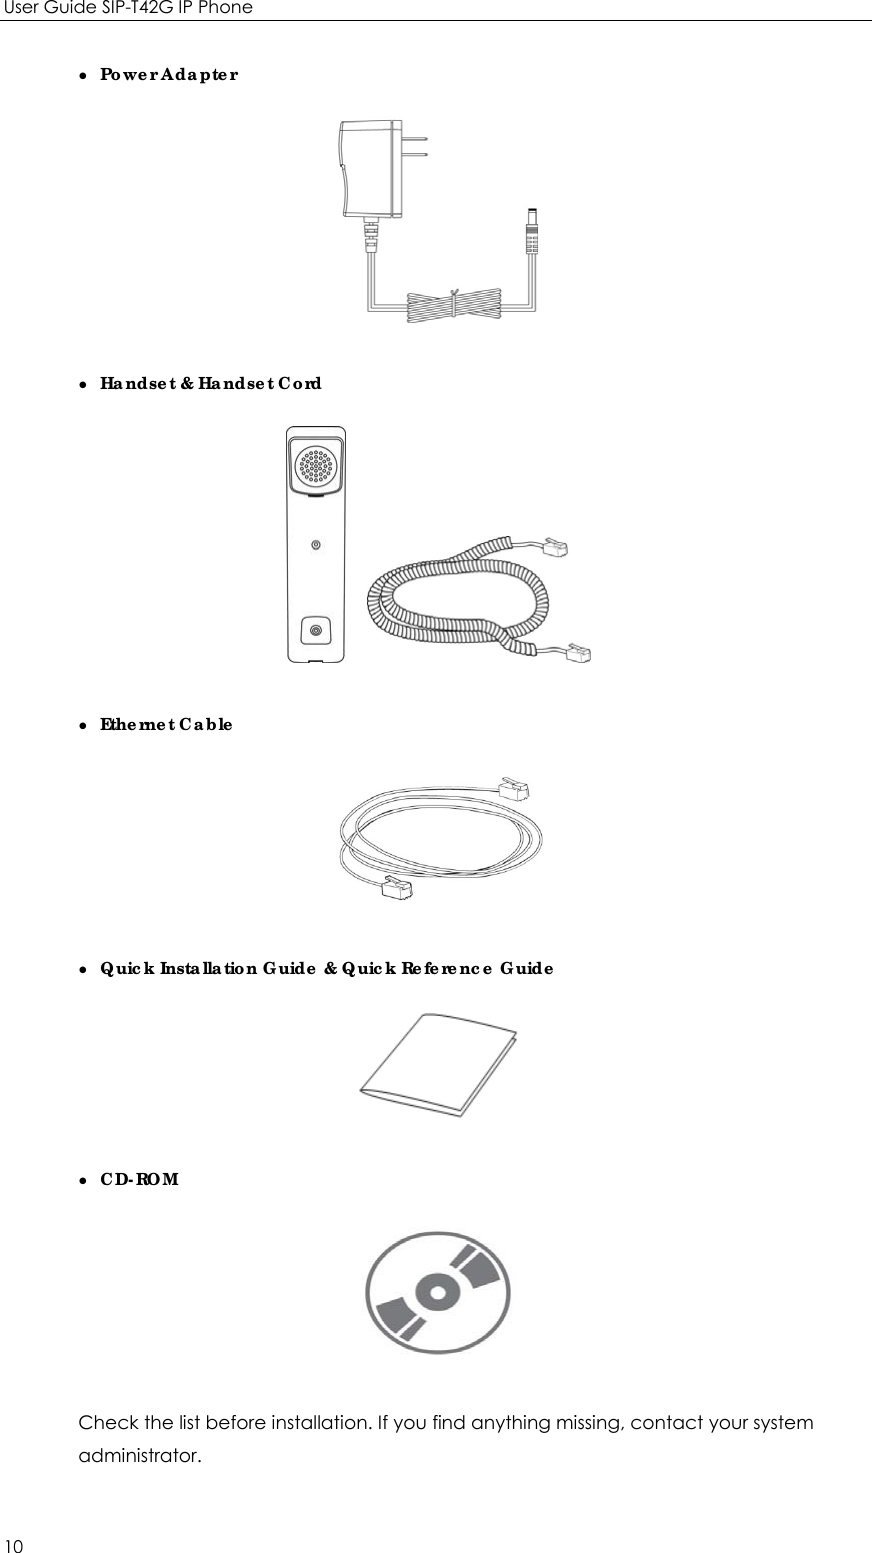 User Guide SIP-T42G IP Phone 10 z  Power Adapter  z   Handset &amp; Handset Cord     z  Ethernet Cable  z   Quick Installation Guide &amp; Quick Reference Guide  z  CD-ROM  Check the list before installation. If you find anything missing, contact your system administrator. 